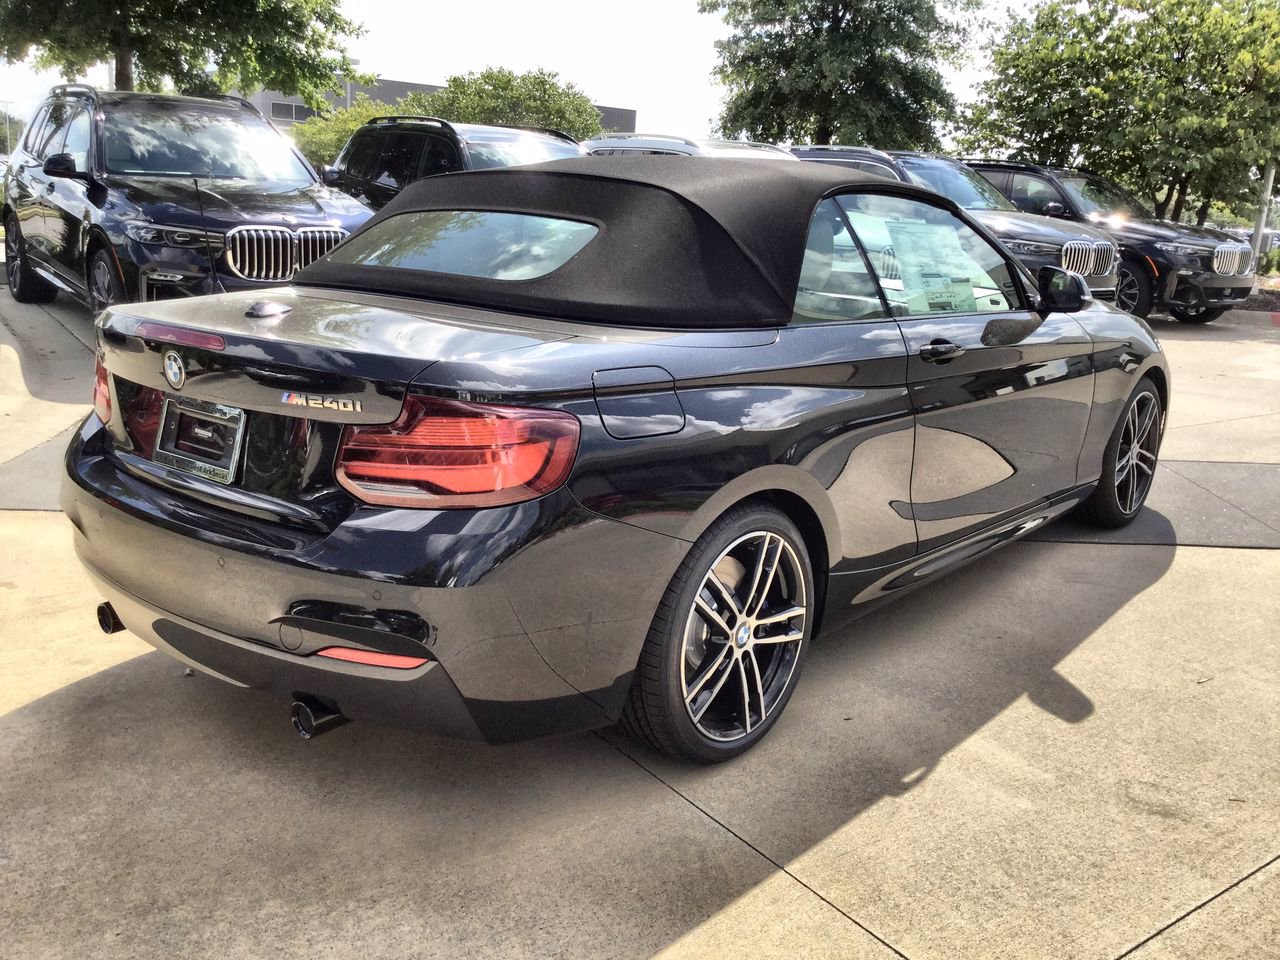 New 2020 Bmw 2 Series M240i Xdrive Convertible In Fayetteville We48351 6388